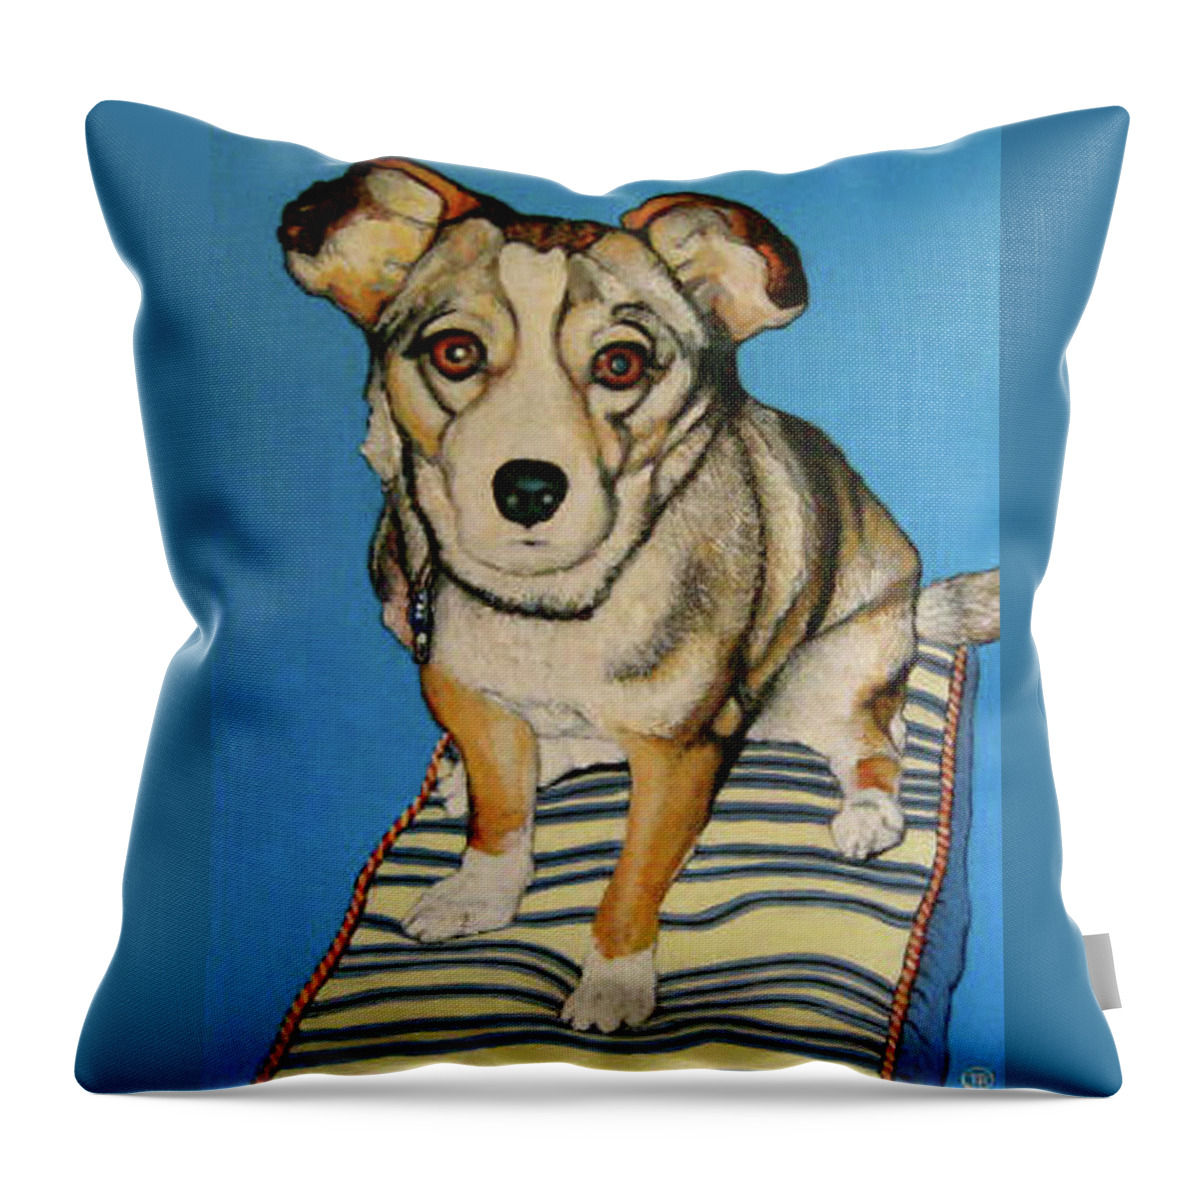 Pet Portrait Throw Pillow featuring the painting Ziggy by Tom Roderick